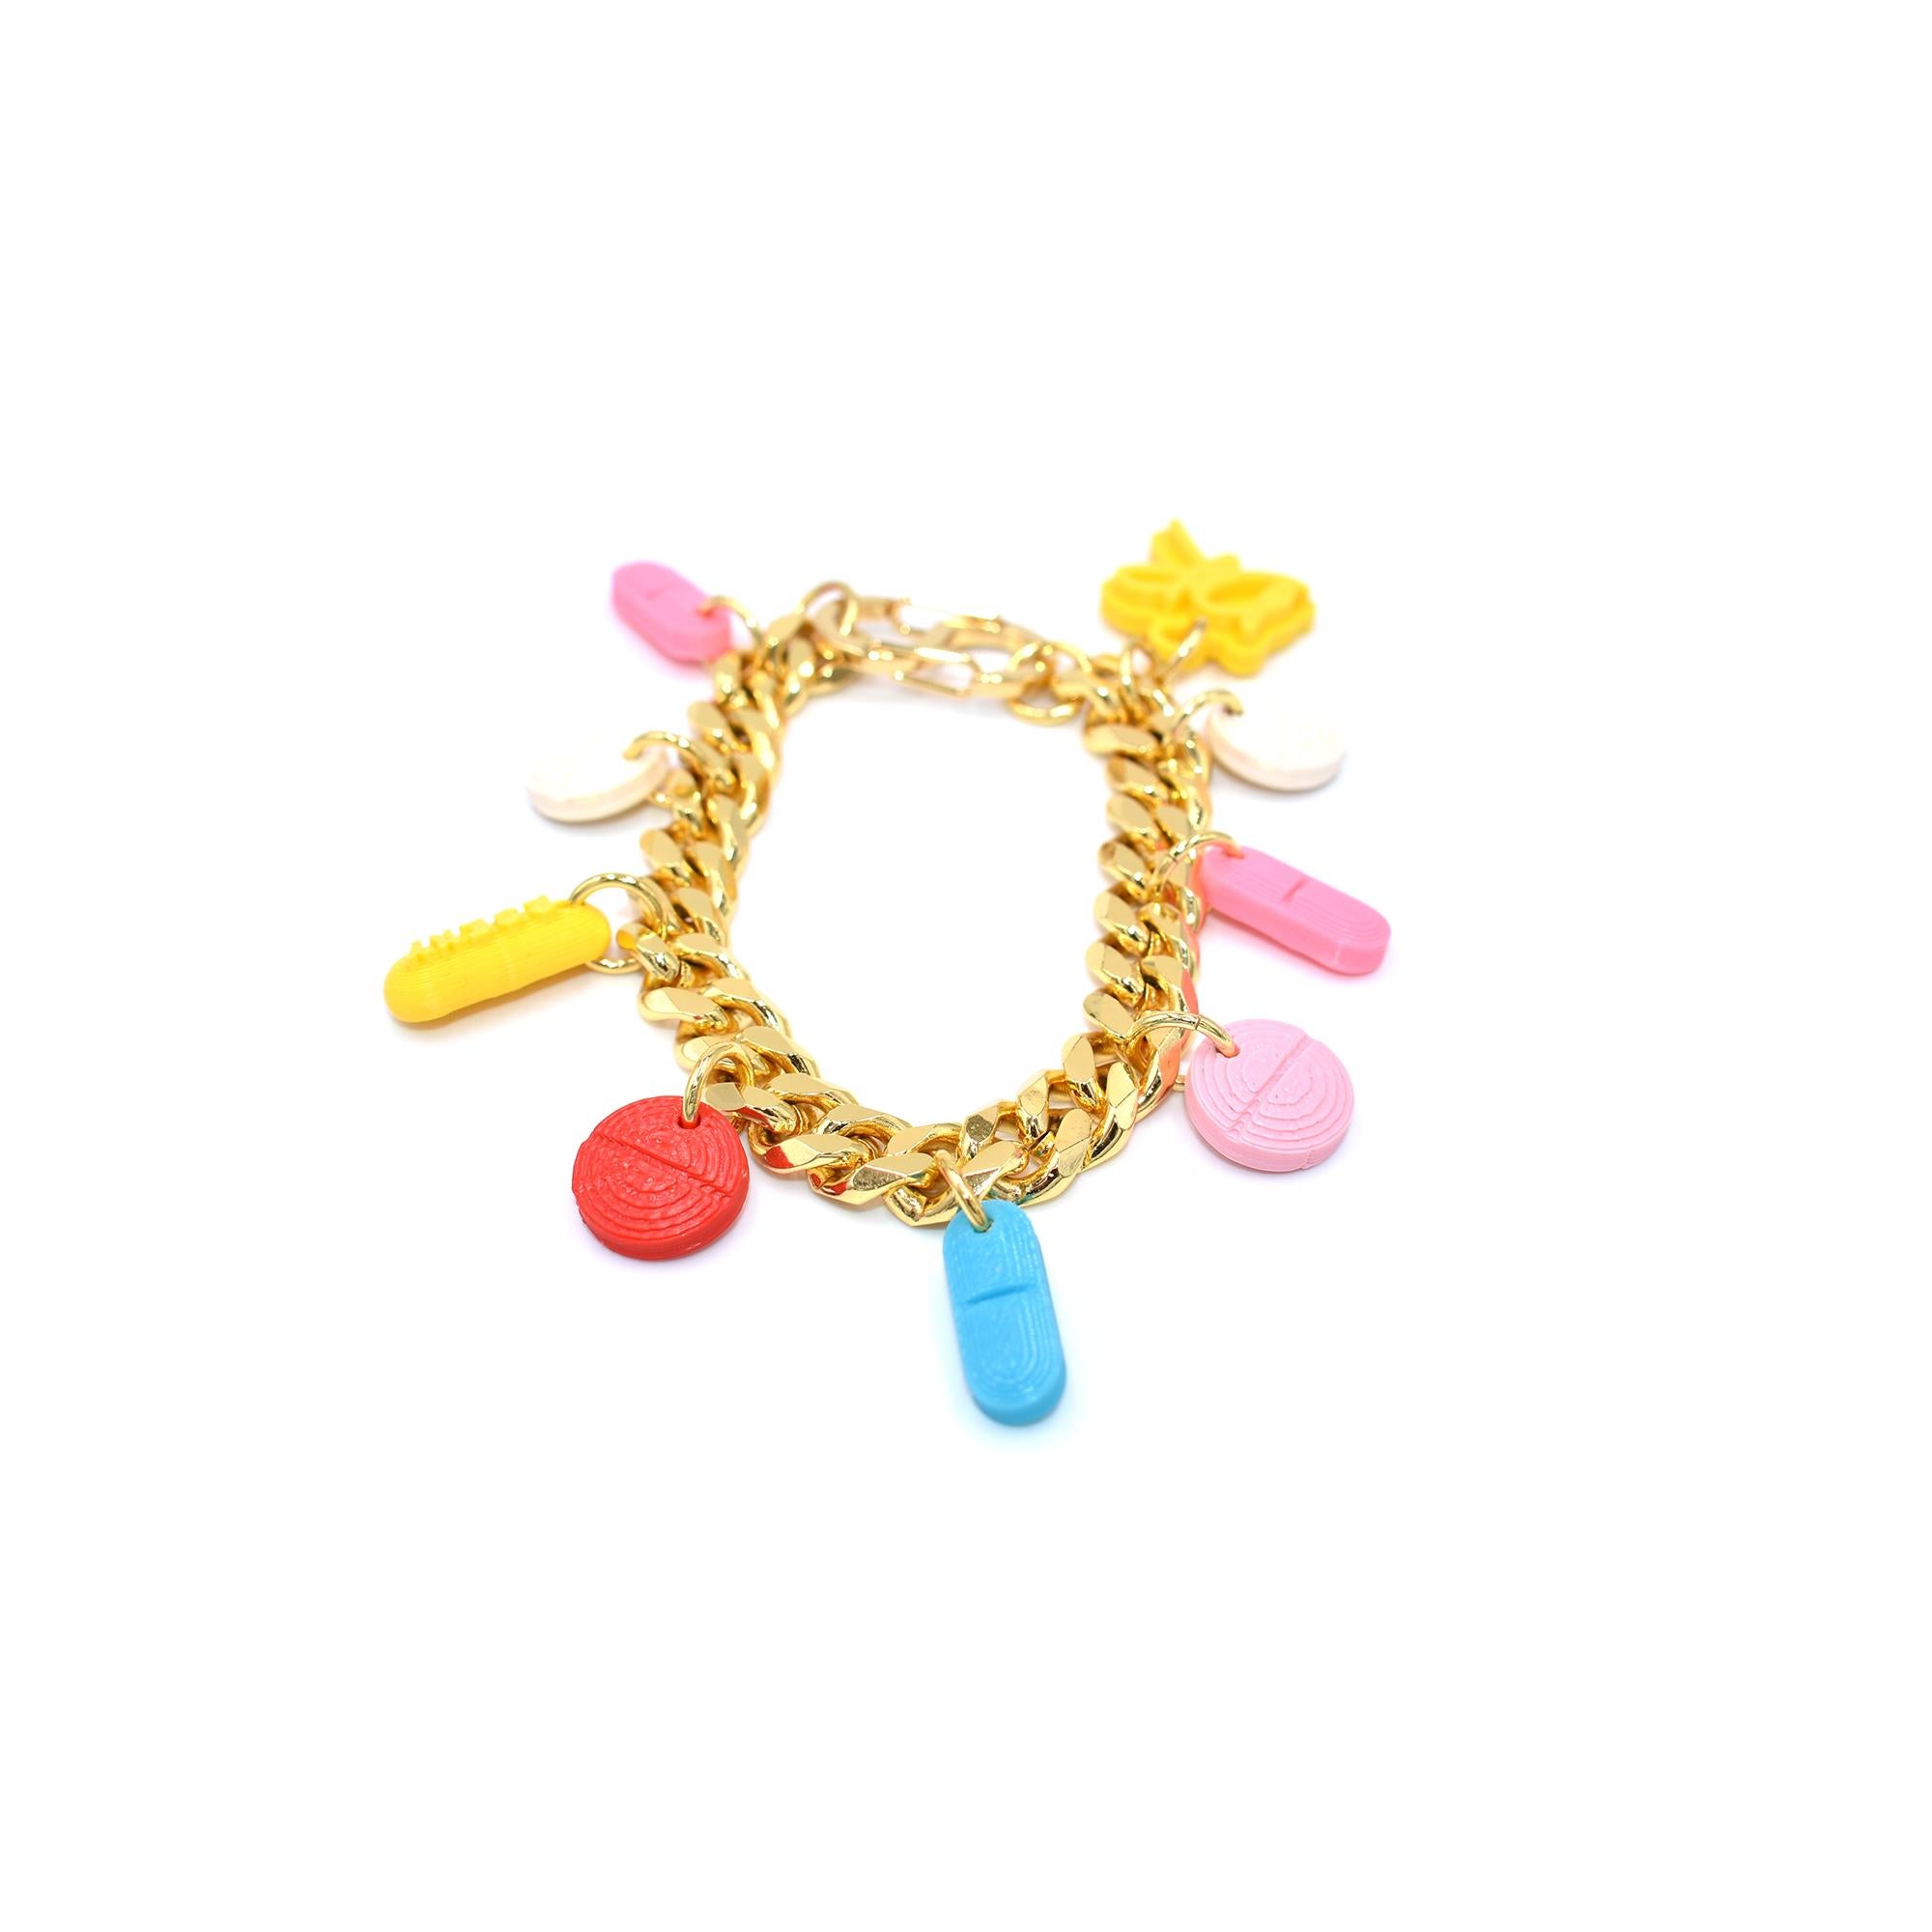 So sexy it hurts! As seen on P!nk and Coi Leray.
An assortment of 3d printed pill charms hang from a gold plated stainless steel bracelet, no two bracelets are alike! 7 1/2